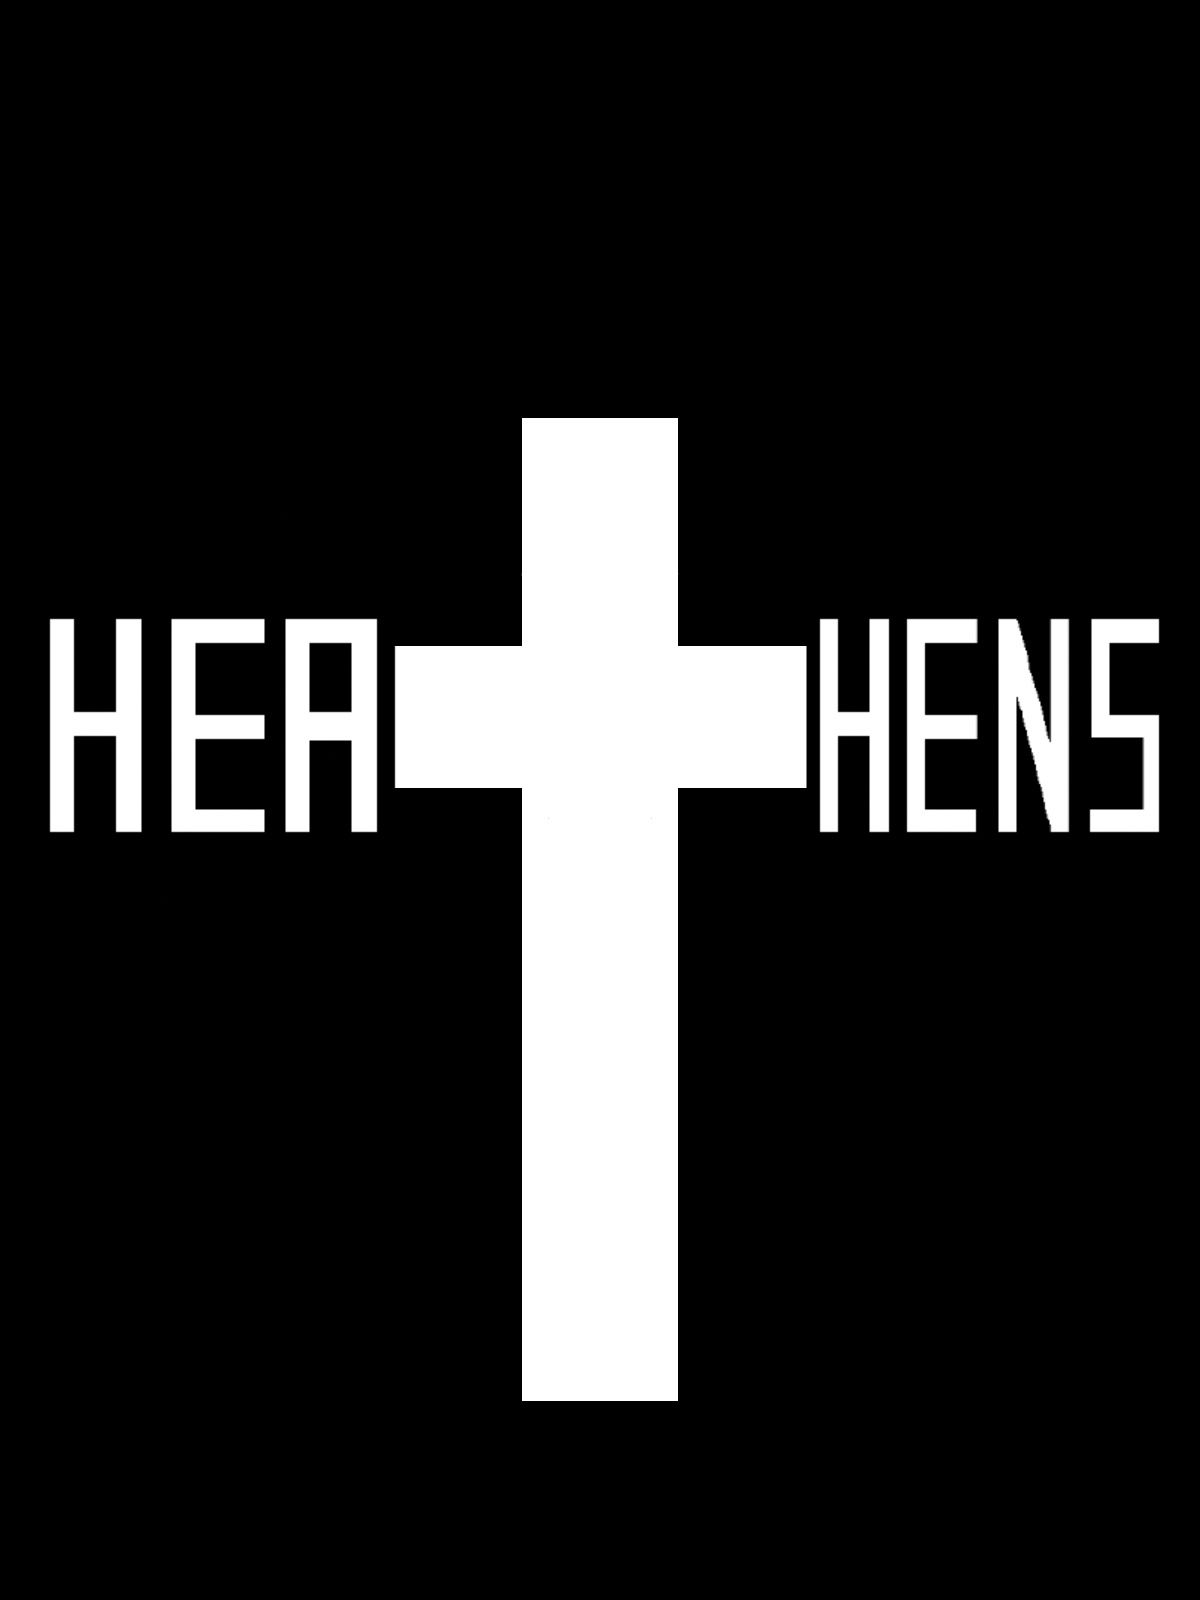 1: Heathens: The scale of evil of religion